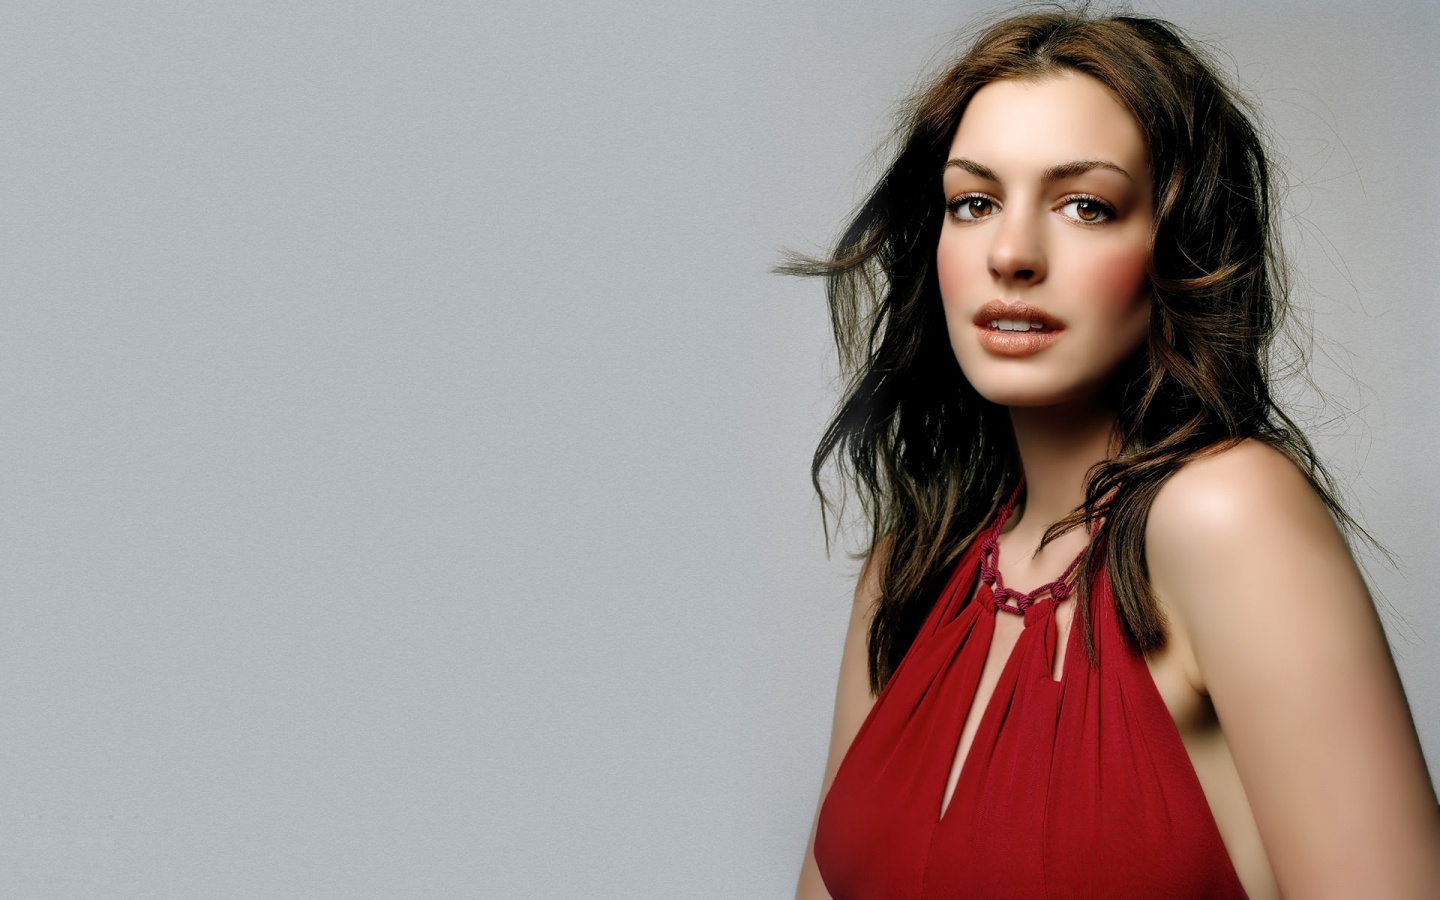 Gorgeous Anne Hathaway for 1440 x 900 widescreen resolution